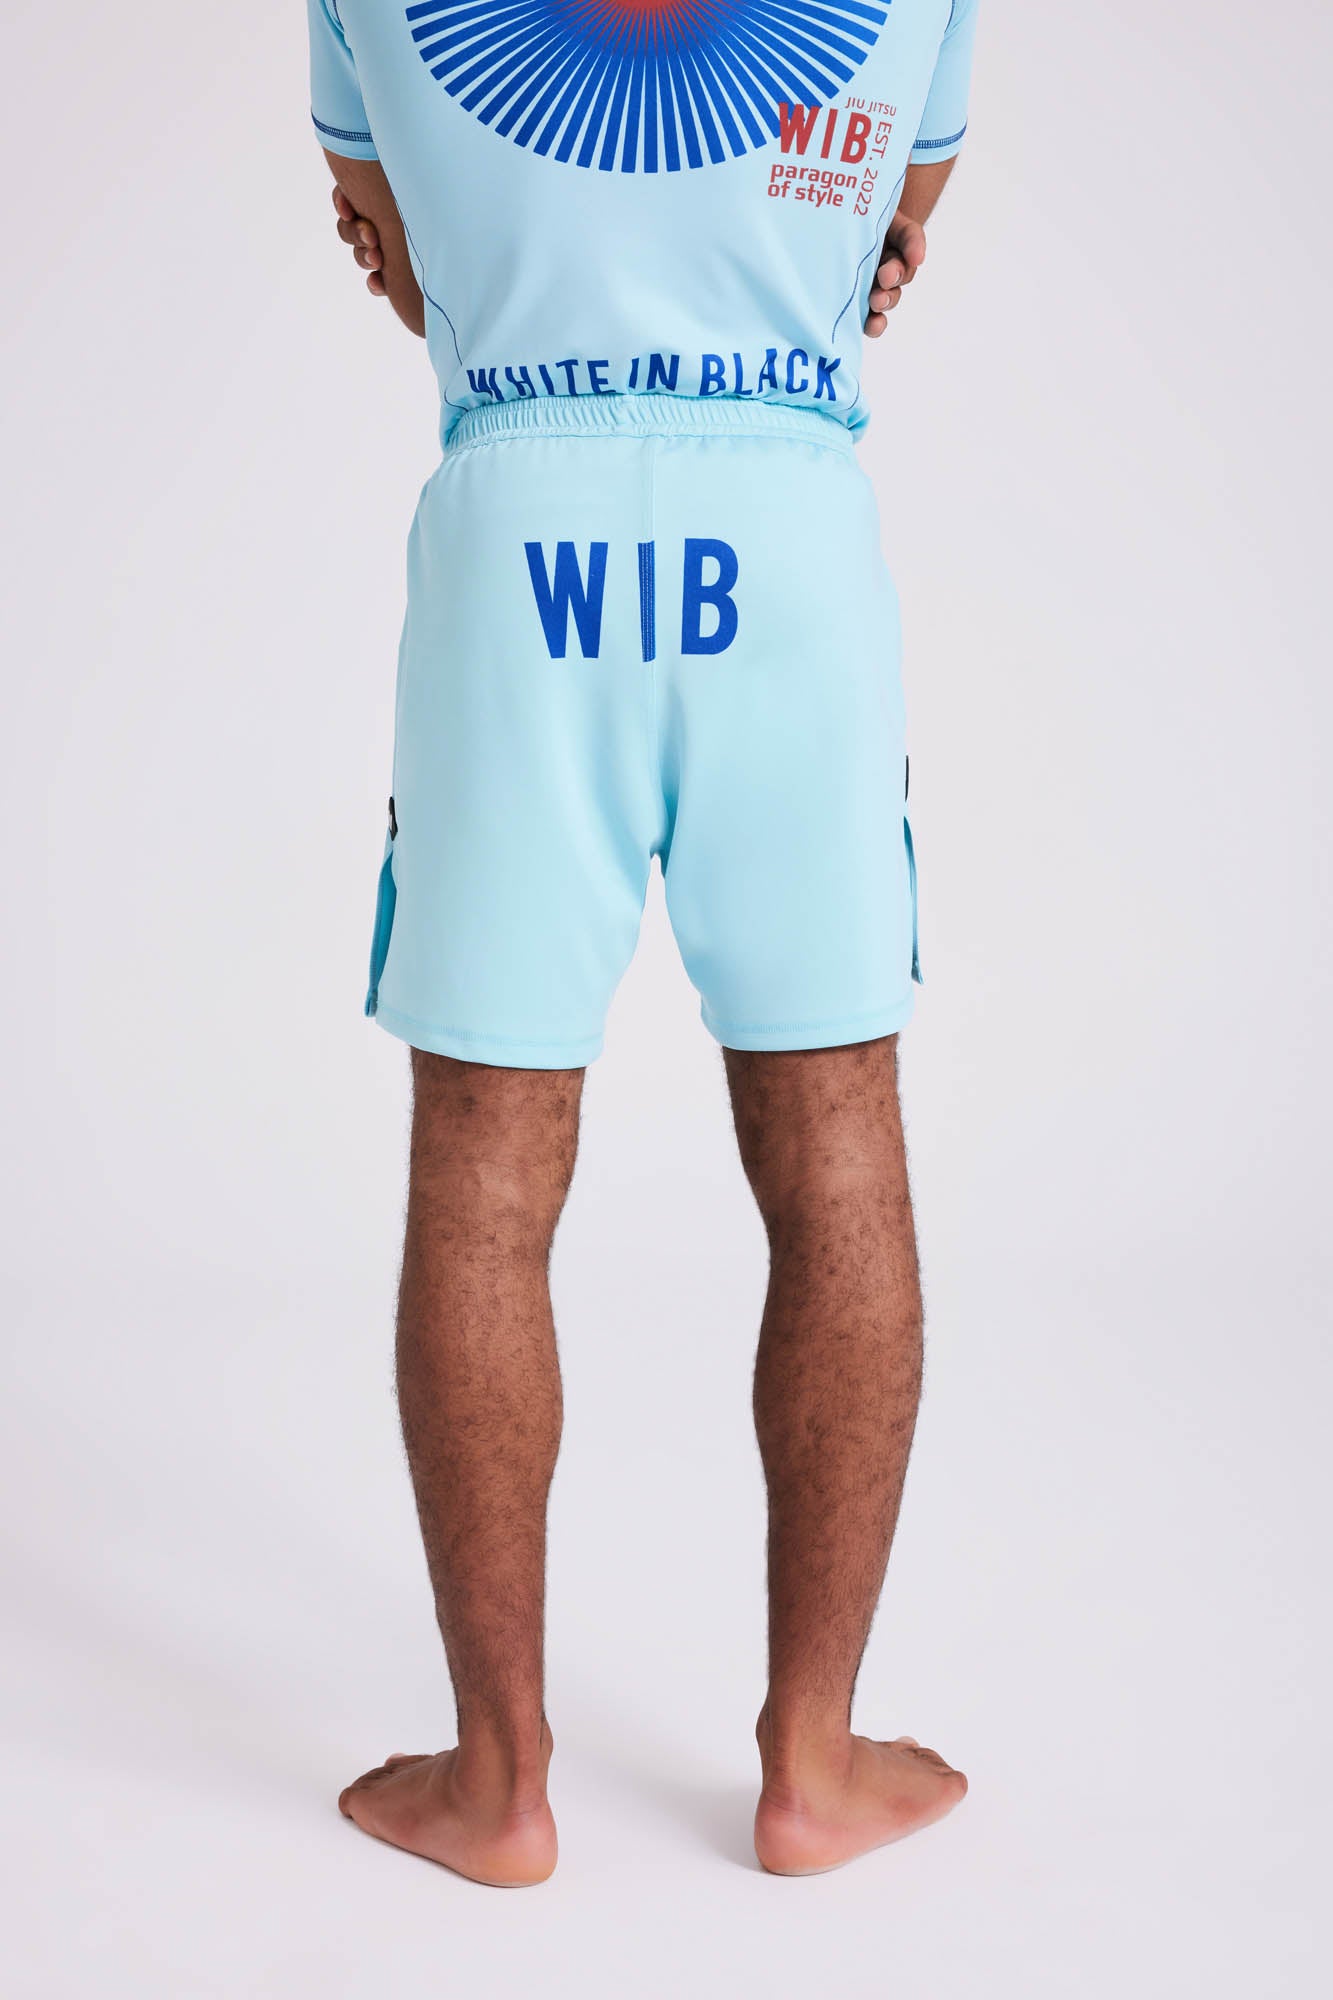 COLL1: Blue Shorts White in Black –